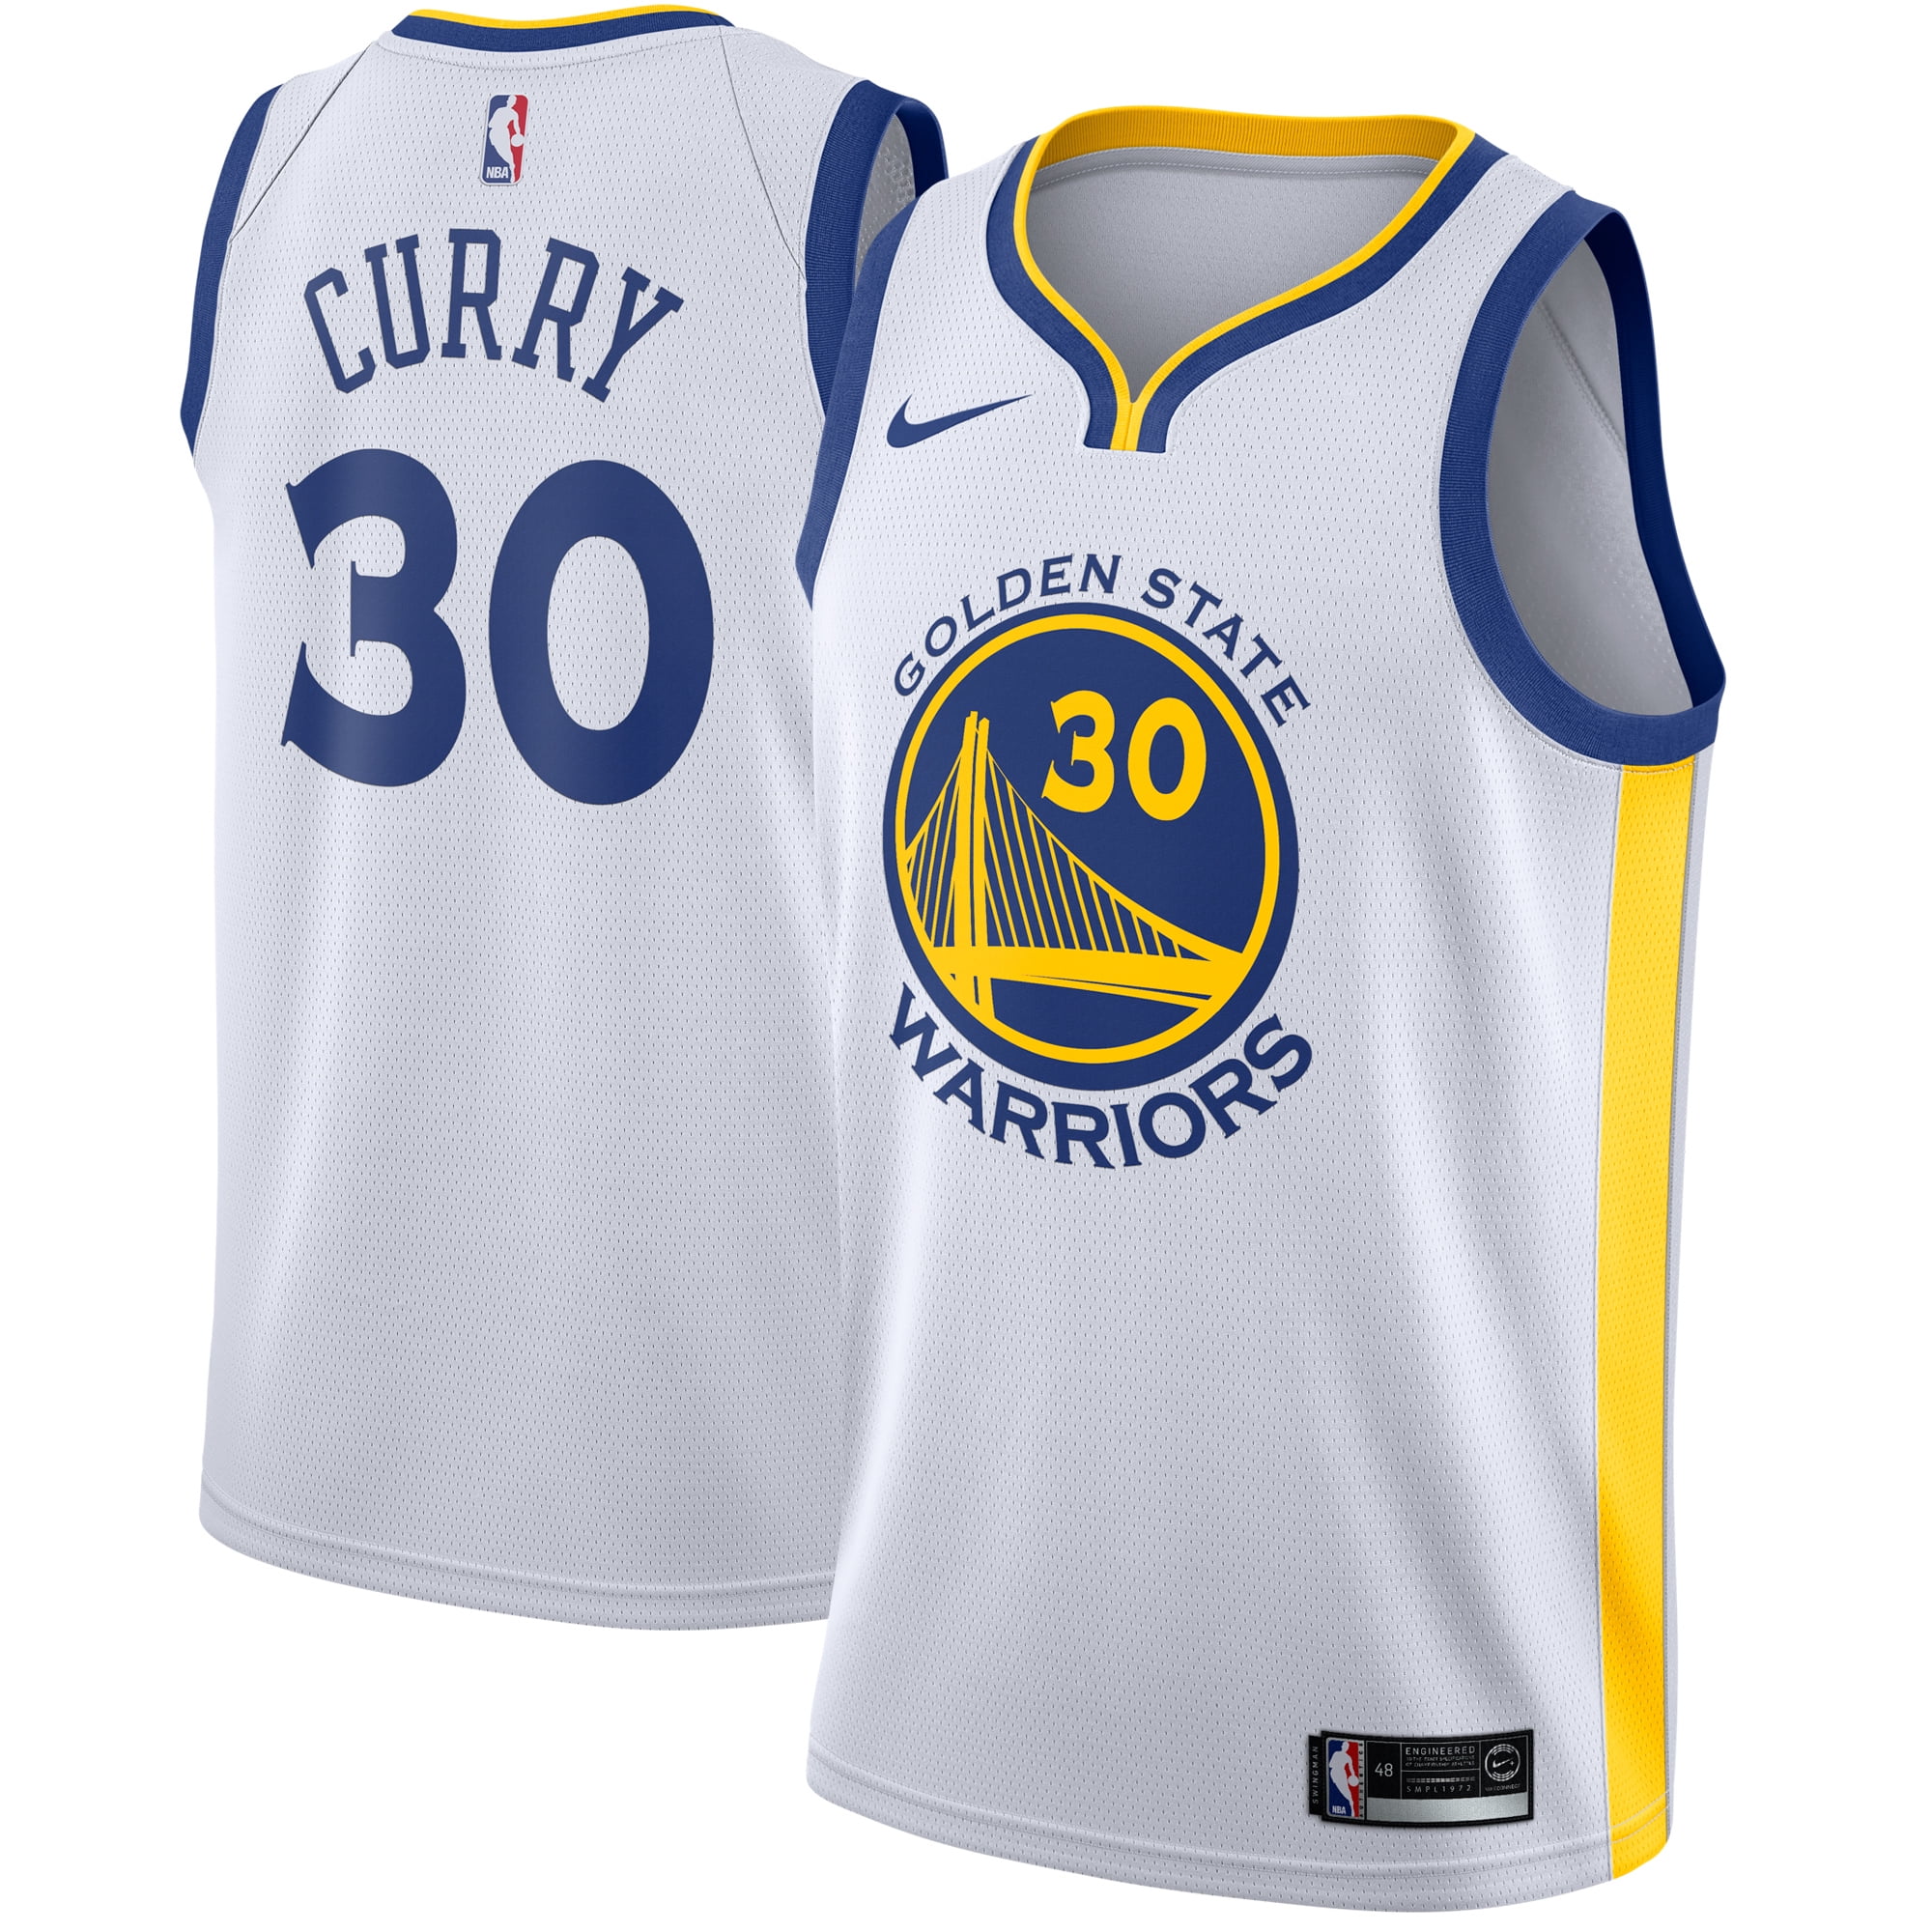 golden state warriors jersey curry